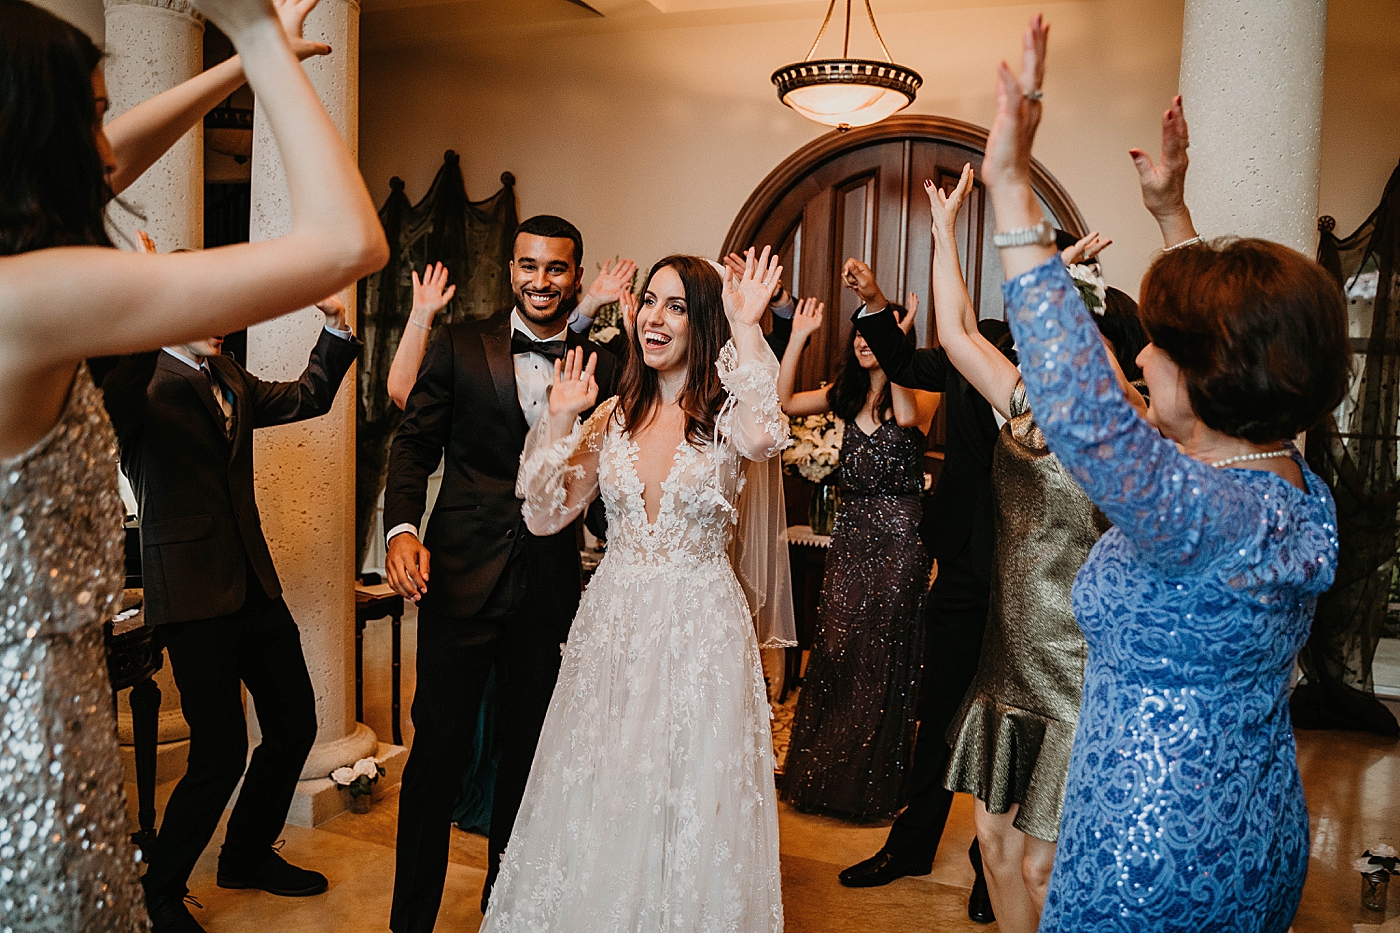 Reception dancing Intimate Home Wedding captured by South Florida Wedding Photographer Krystal Capone Photography